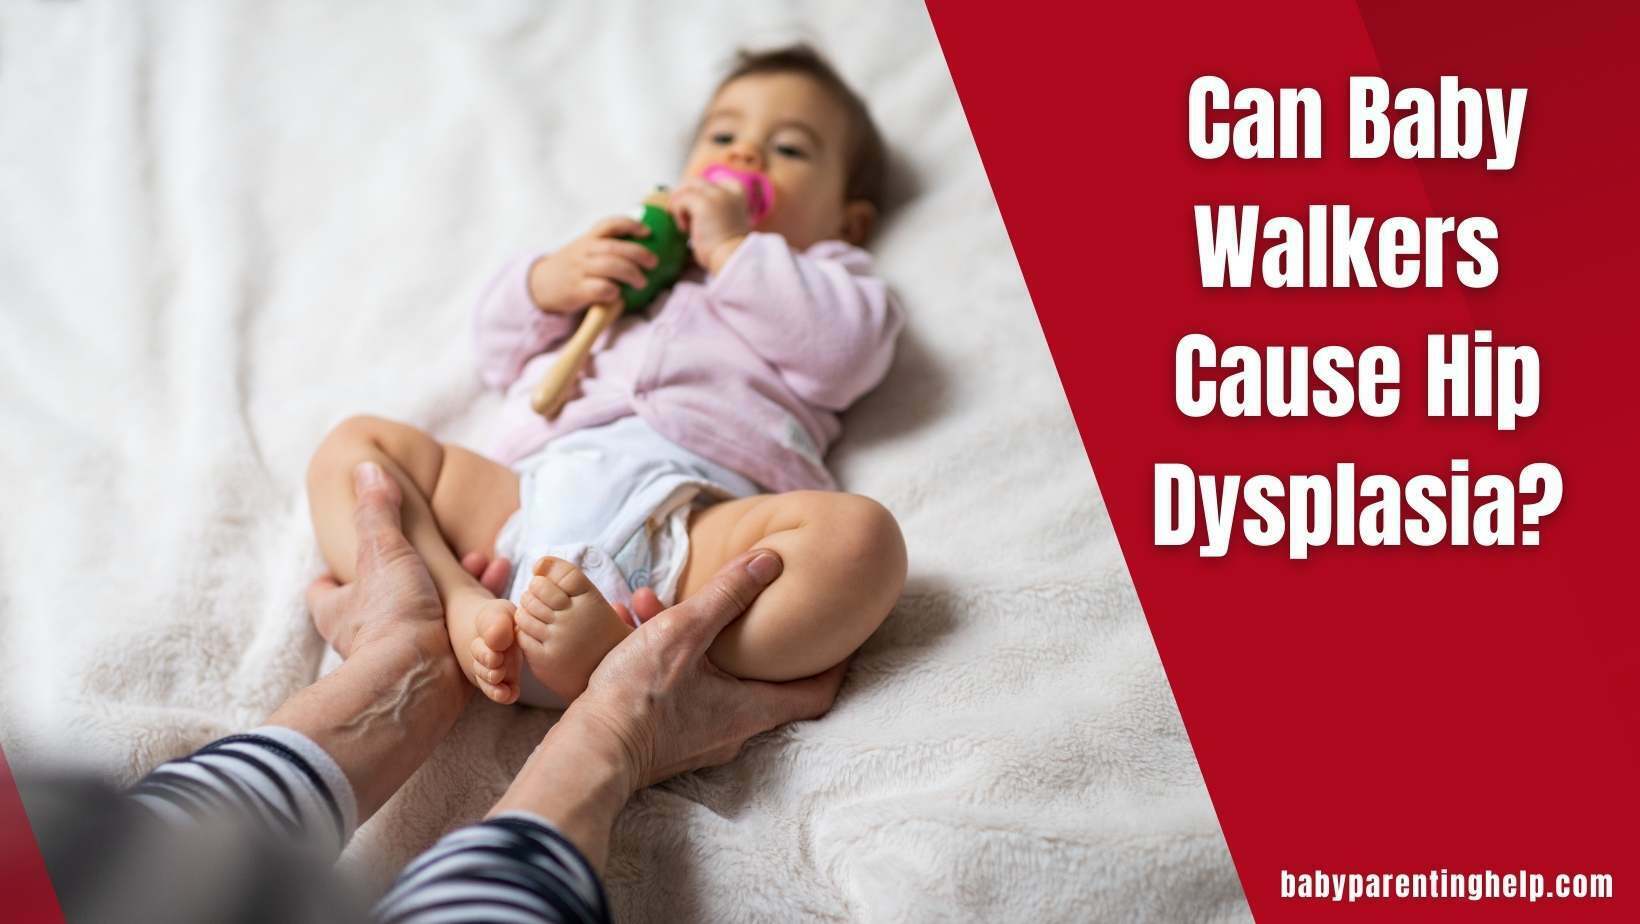 Can Baby Walkers Cause Hip Dysplasia